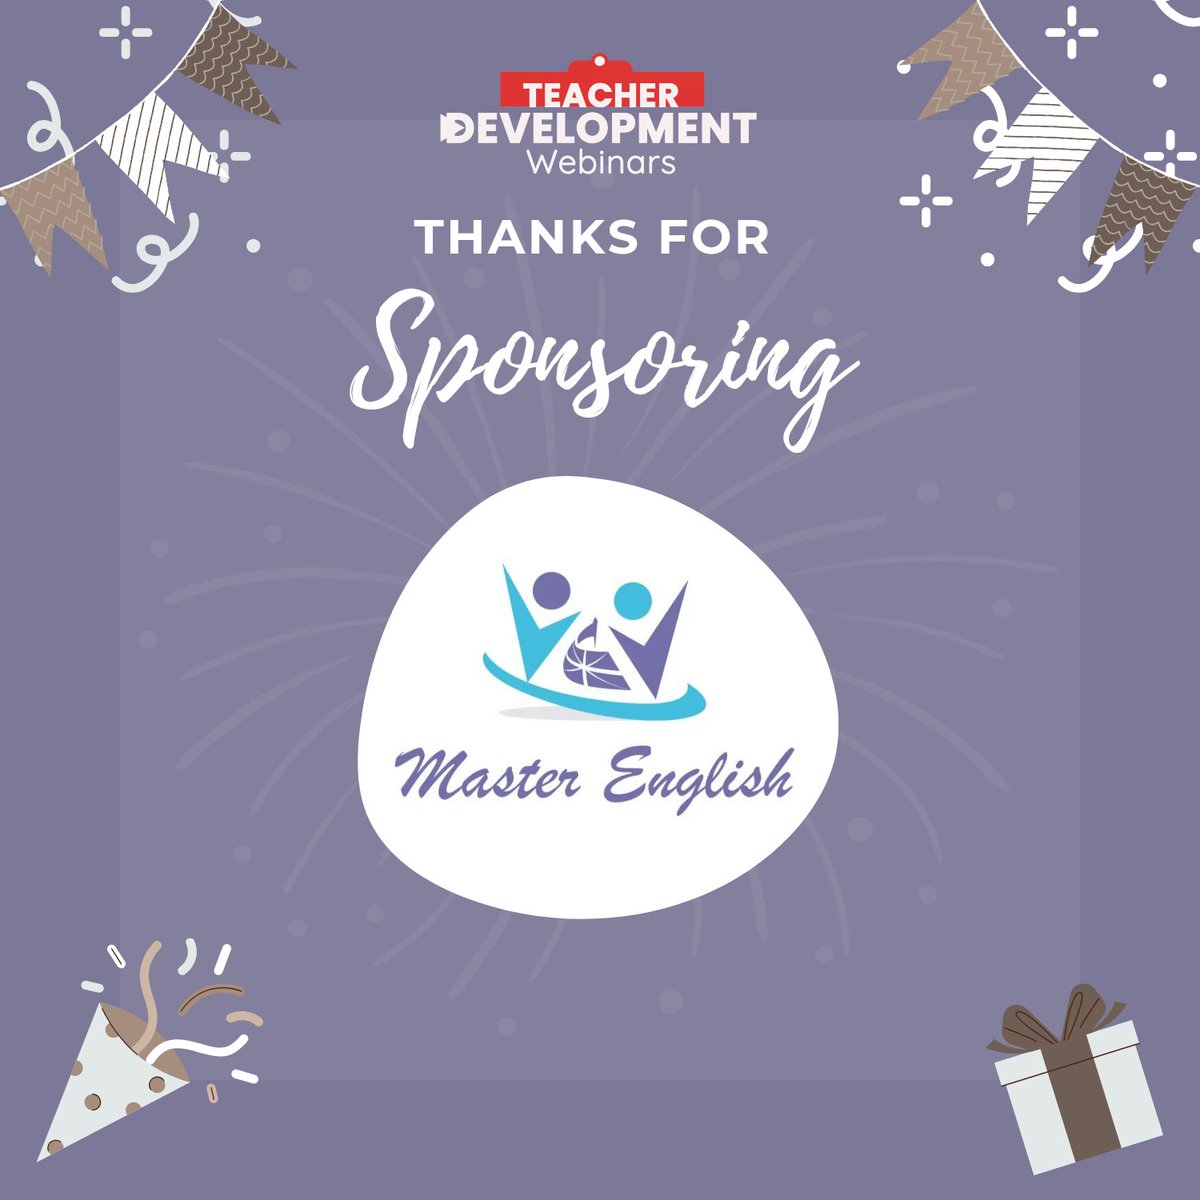 Cheers to Master English Education & Training, GCC for fueling our virtual learning journey in 2023!

Your generous sponsorship of our Zoom account kept us connected, inspired and ready for @TDWebinars.

#TDWebinars #NewYearNewBeginnings #CheersToMTE  #TeacherCommunity #ZoomLove